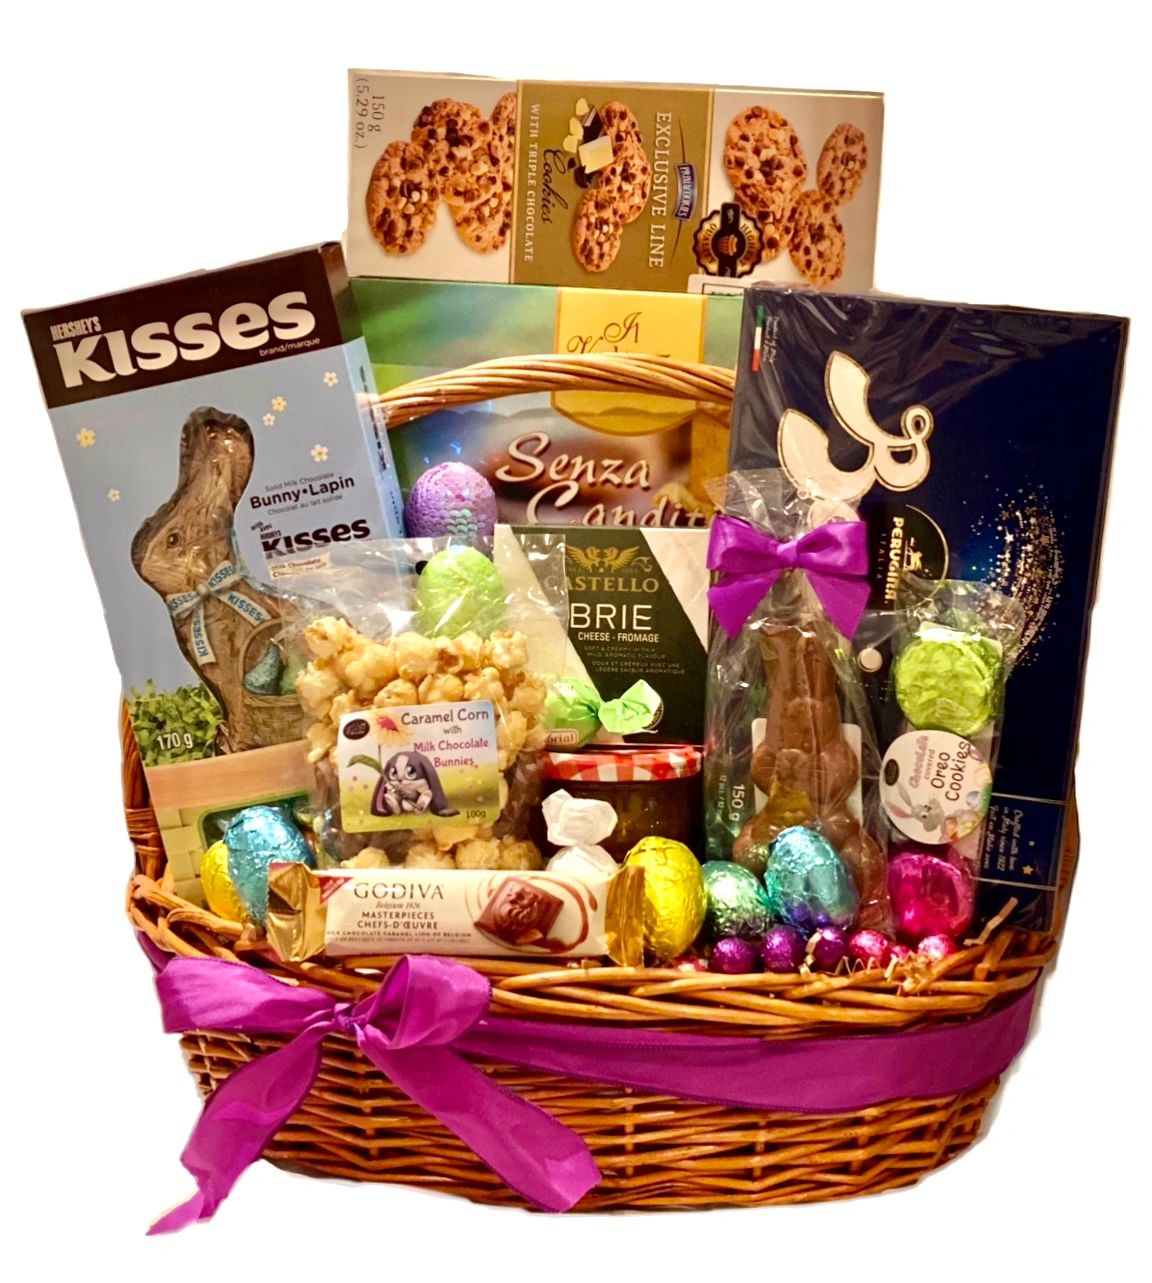 Les Paniers EFD - Baby Gift Baskets, Gift Basket